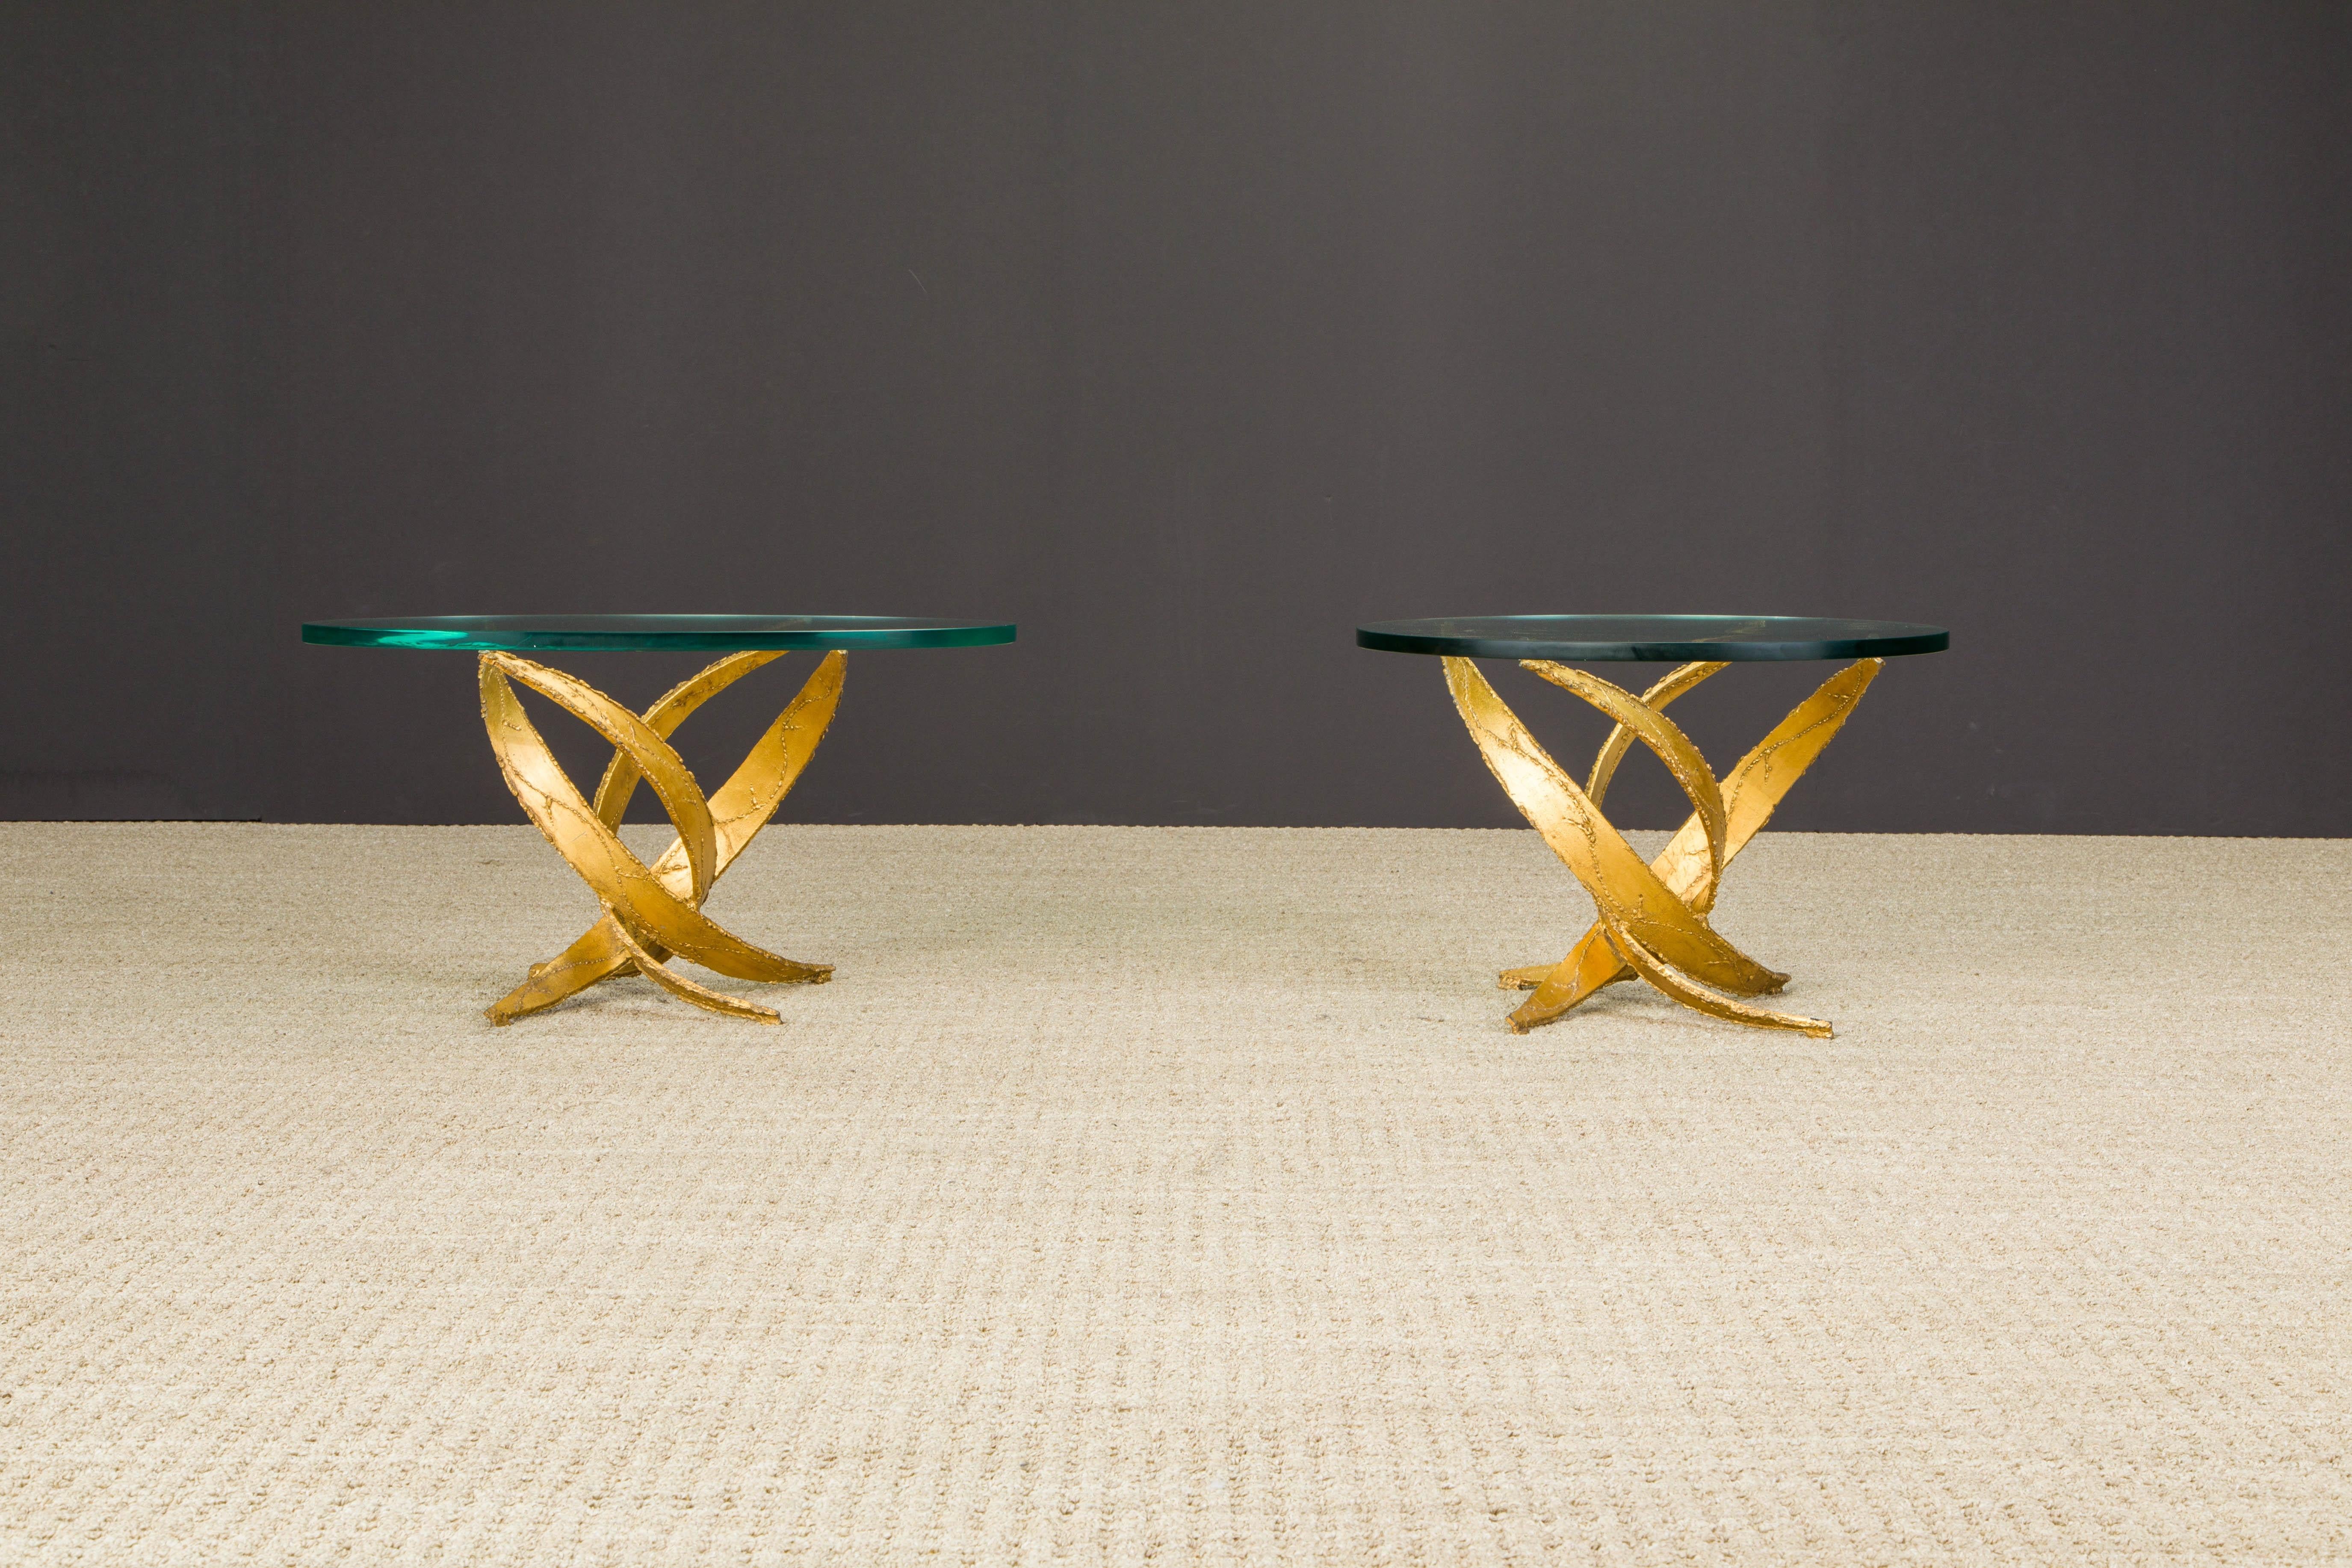 This pair of sculptural Silas Seandel Brutalist side tables are constructed of sections of curved gold tone torch cut metal which have been formed into an organically abstract structure and functional art piece. This structure balances a piece of